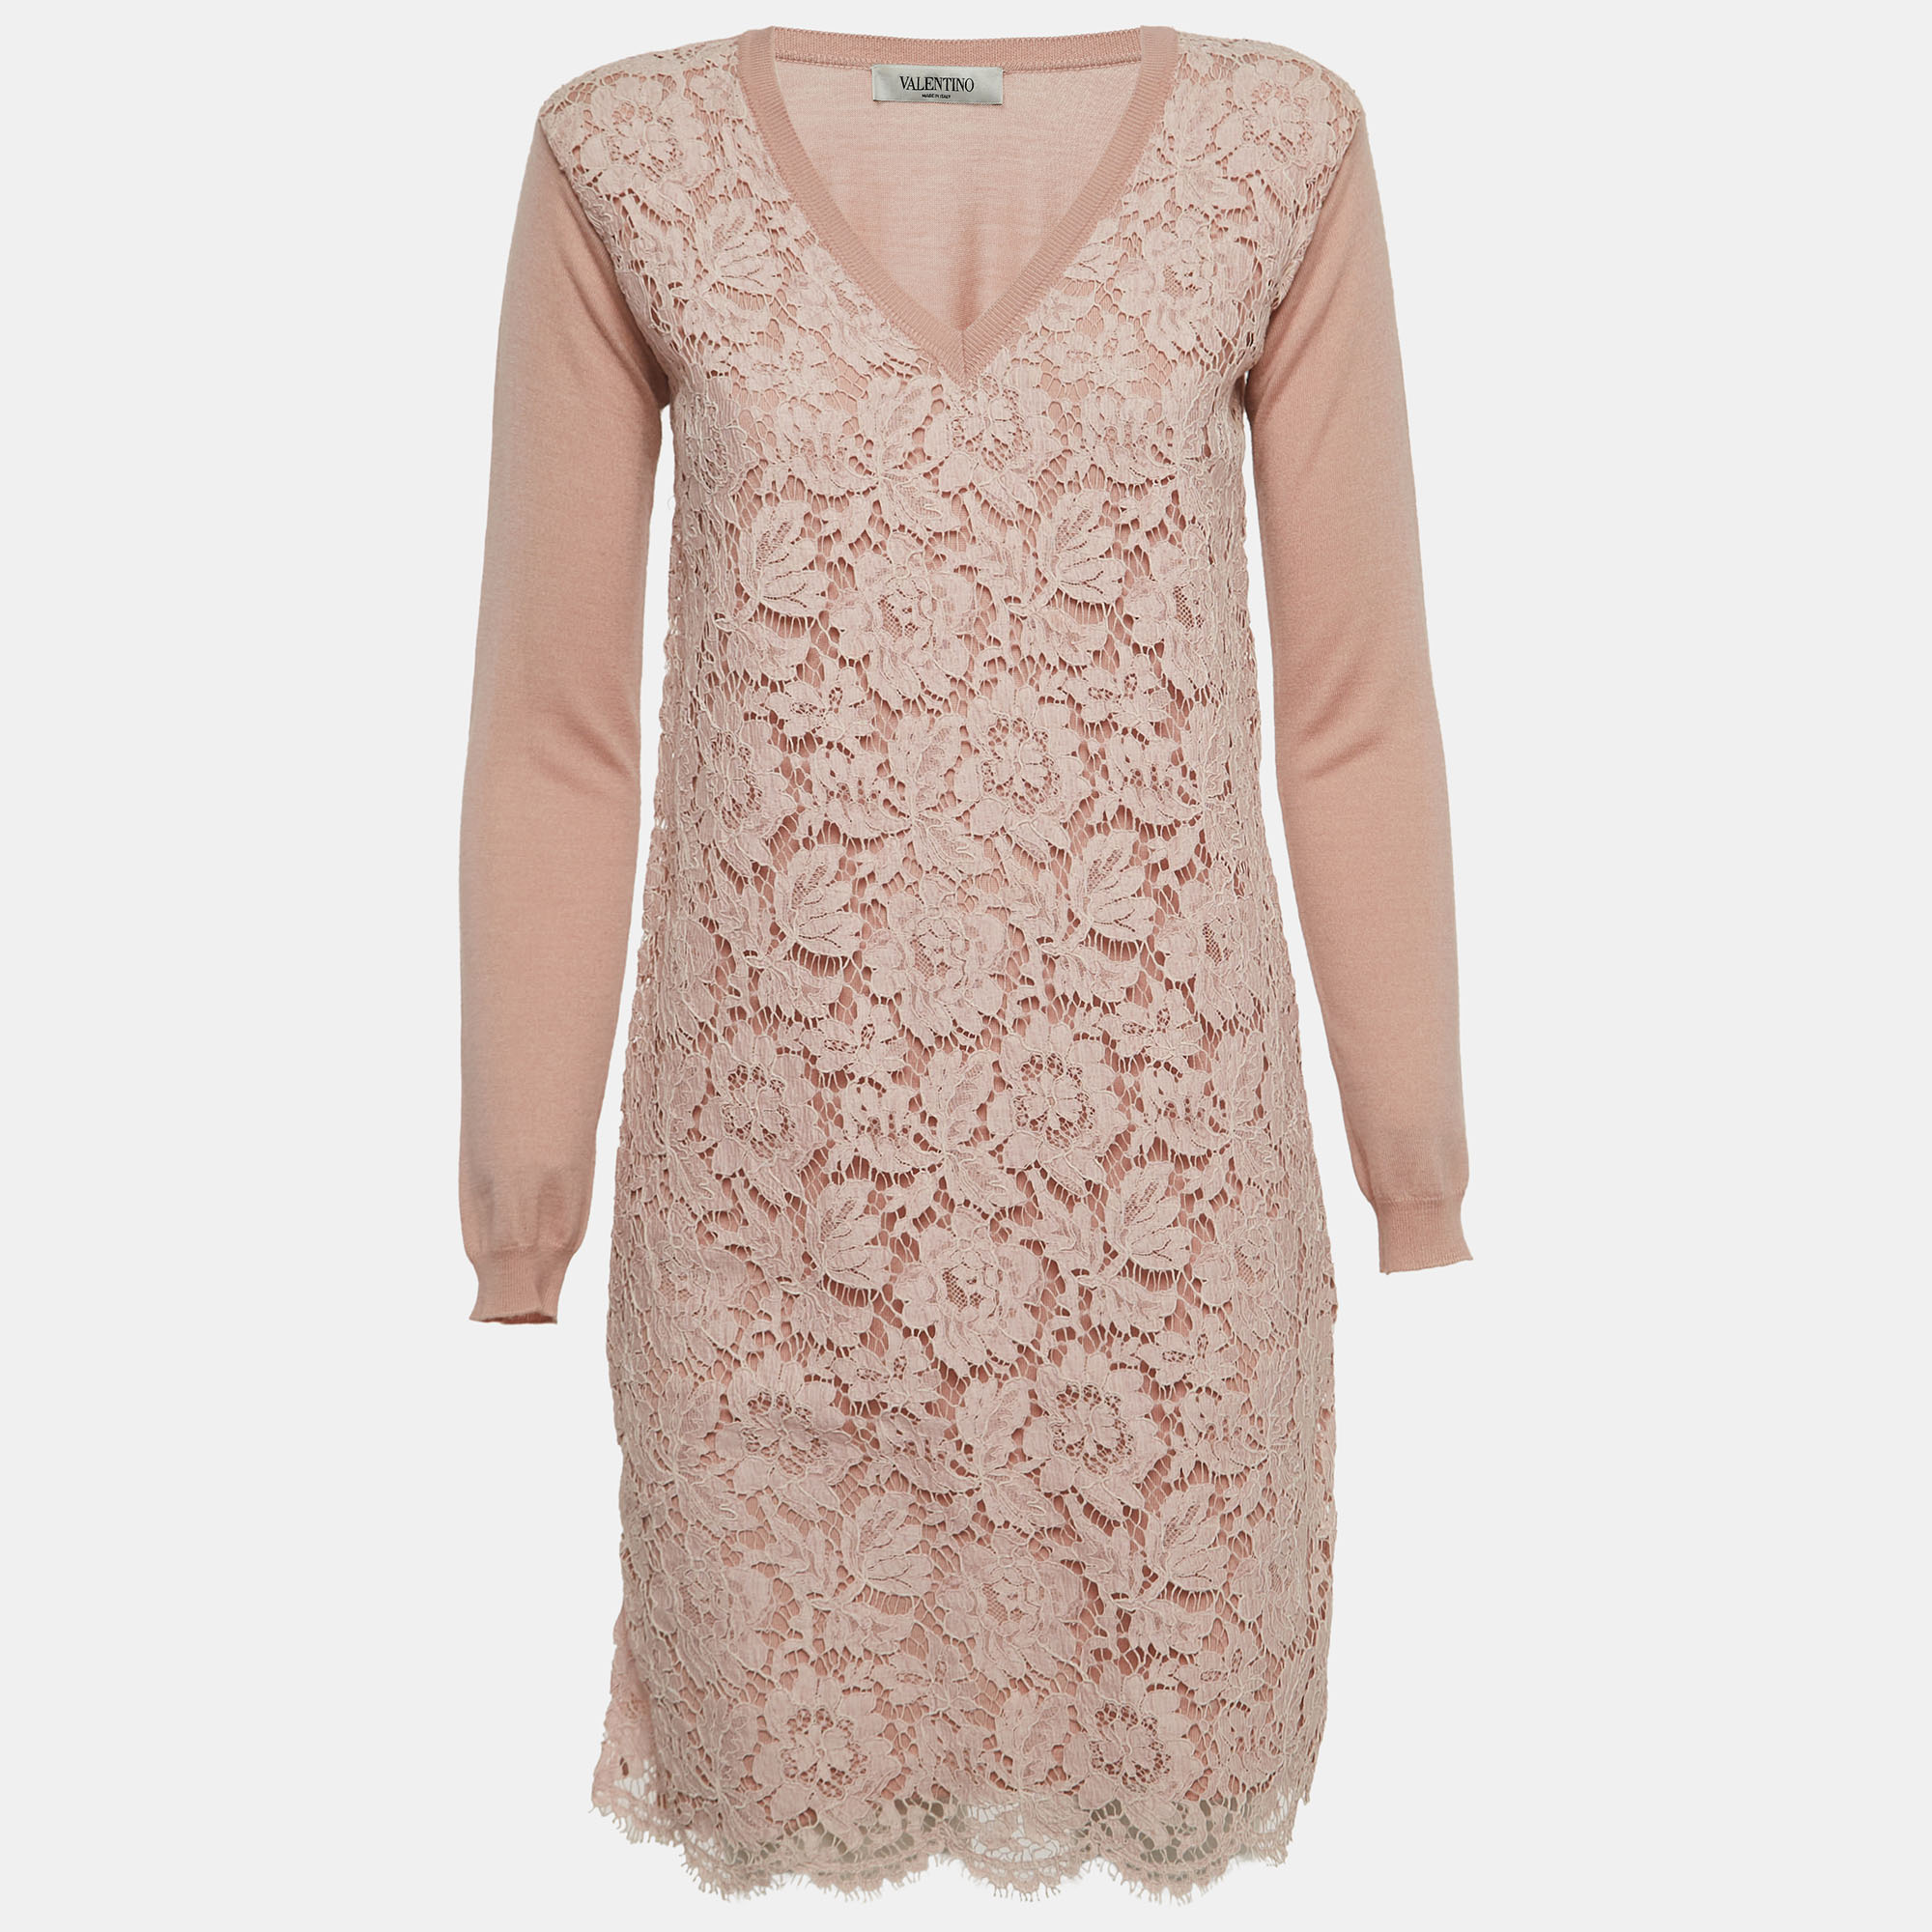 Valentino pale pink floral lace & wool knit long sleeve dress s